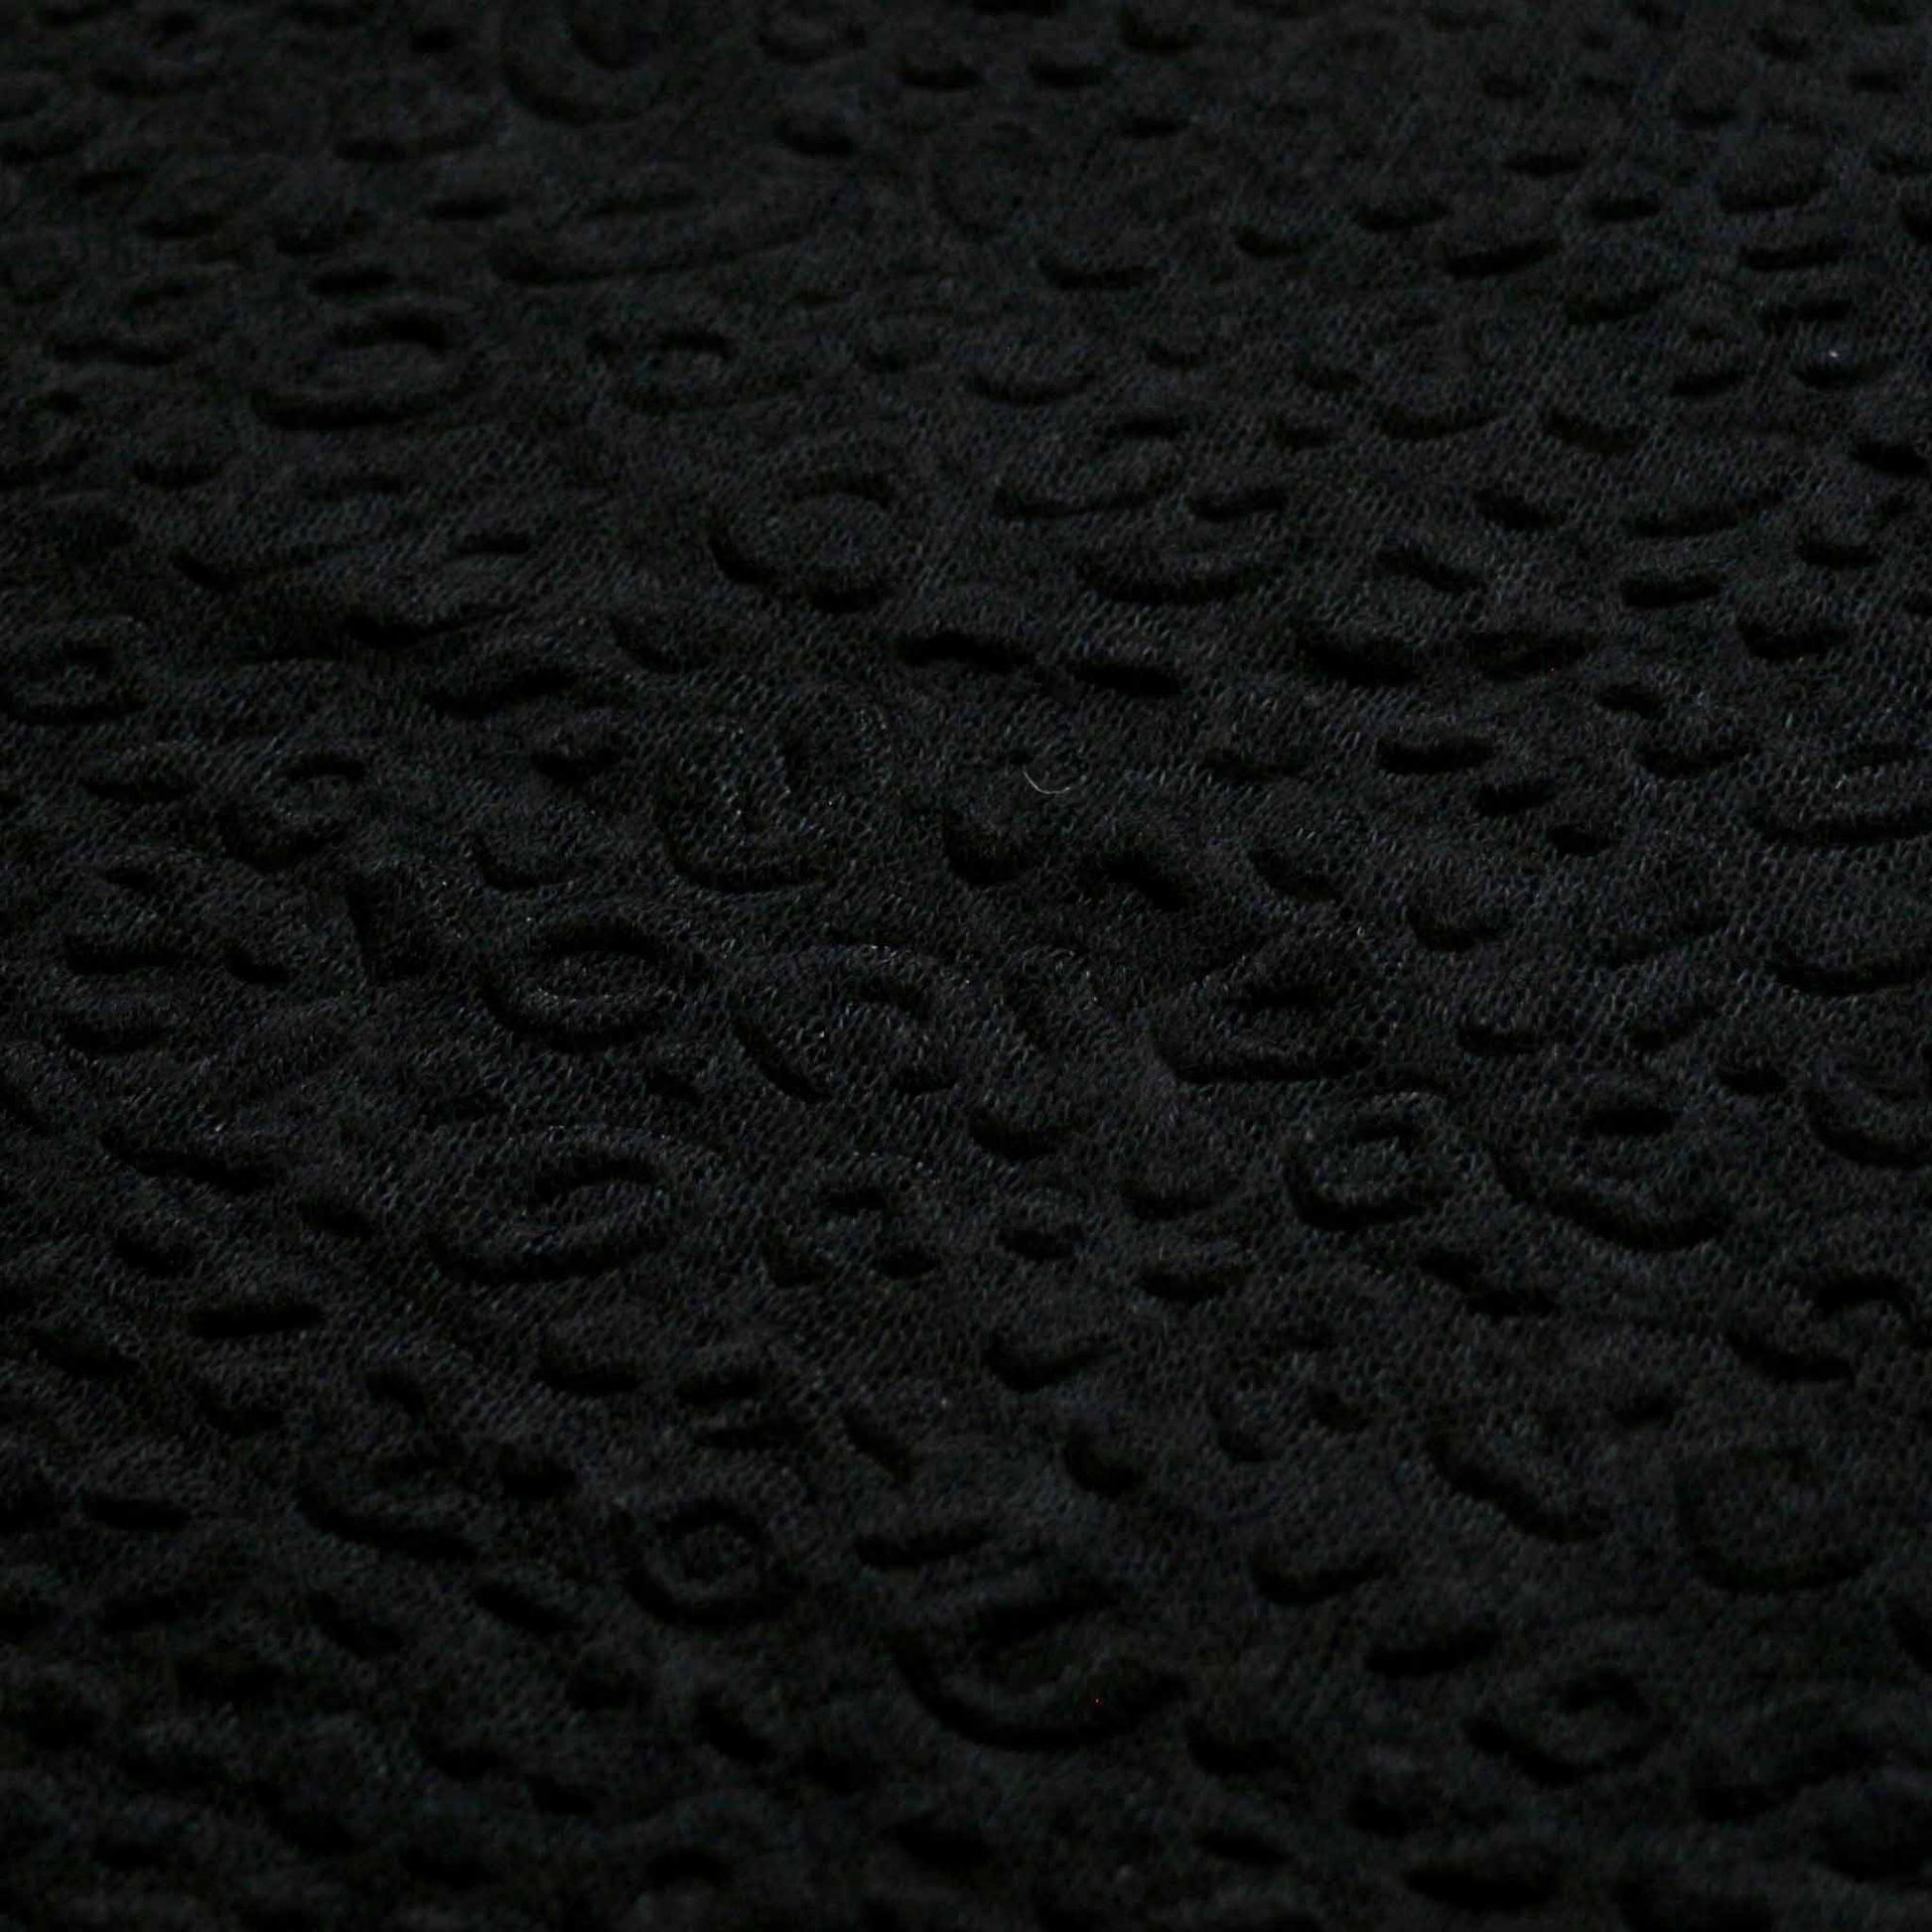 jersey knit black dressmaking fabric with embossed decorative patterned texture